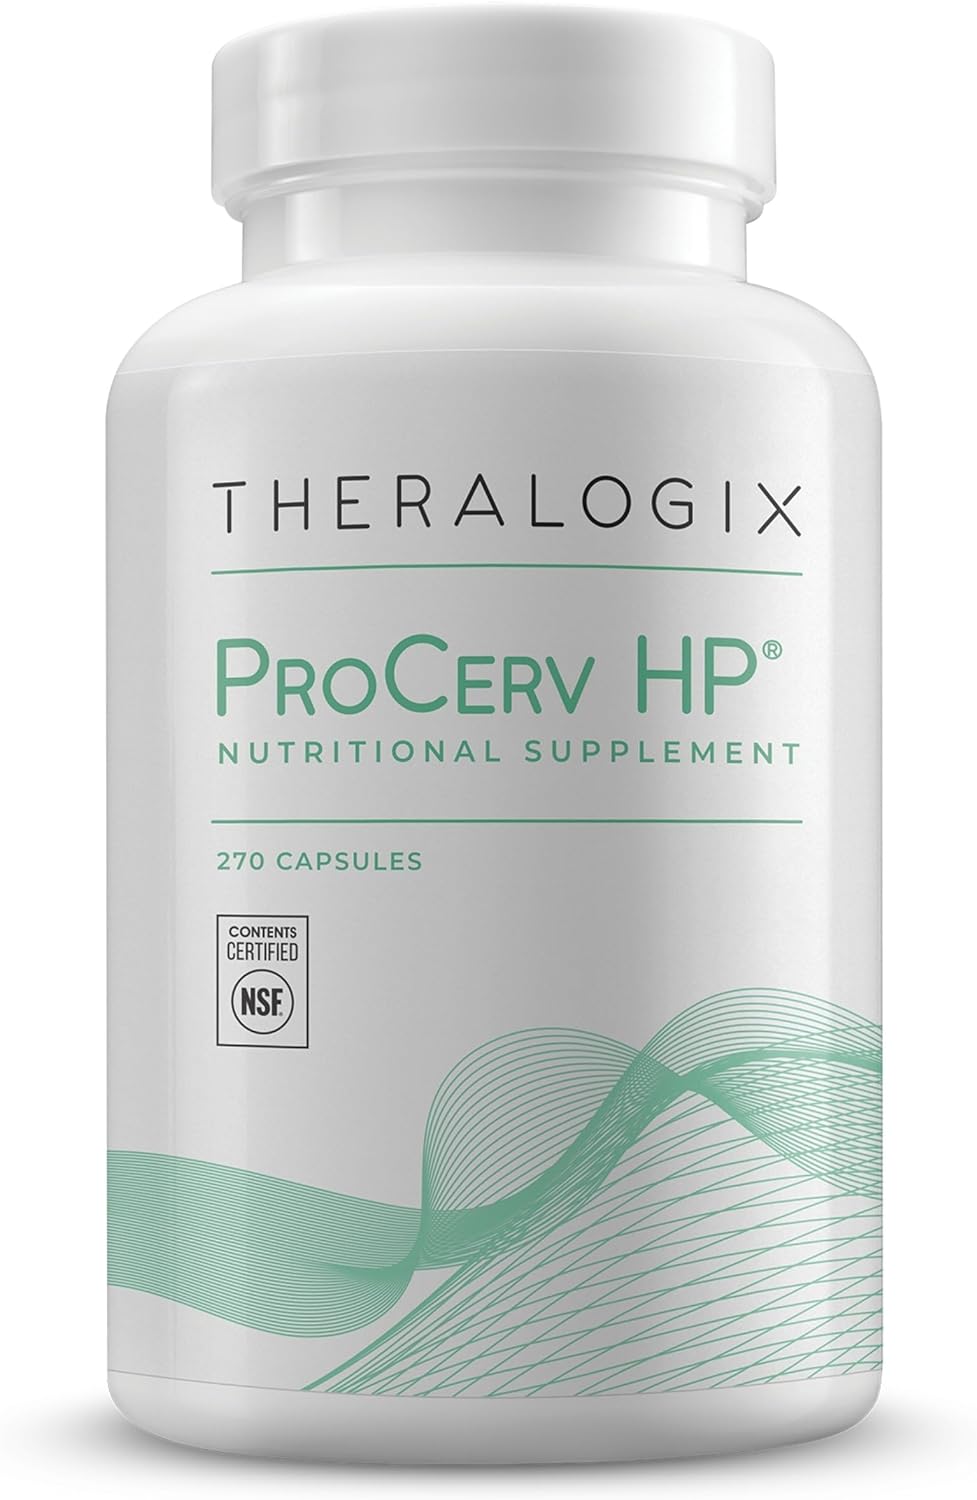 Theralogix ProCerv HP High-Potency Multivitamin - 90-Day Supply - Support for Women & Men - Immune Support Supplement - Includes Vitamin B, Vitamin C, Vitamin D & Zinc - NSF Certified - 270 Capsules